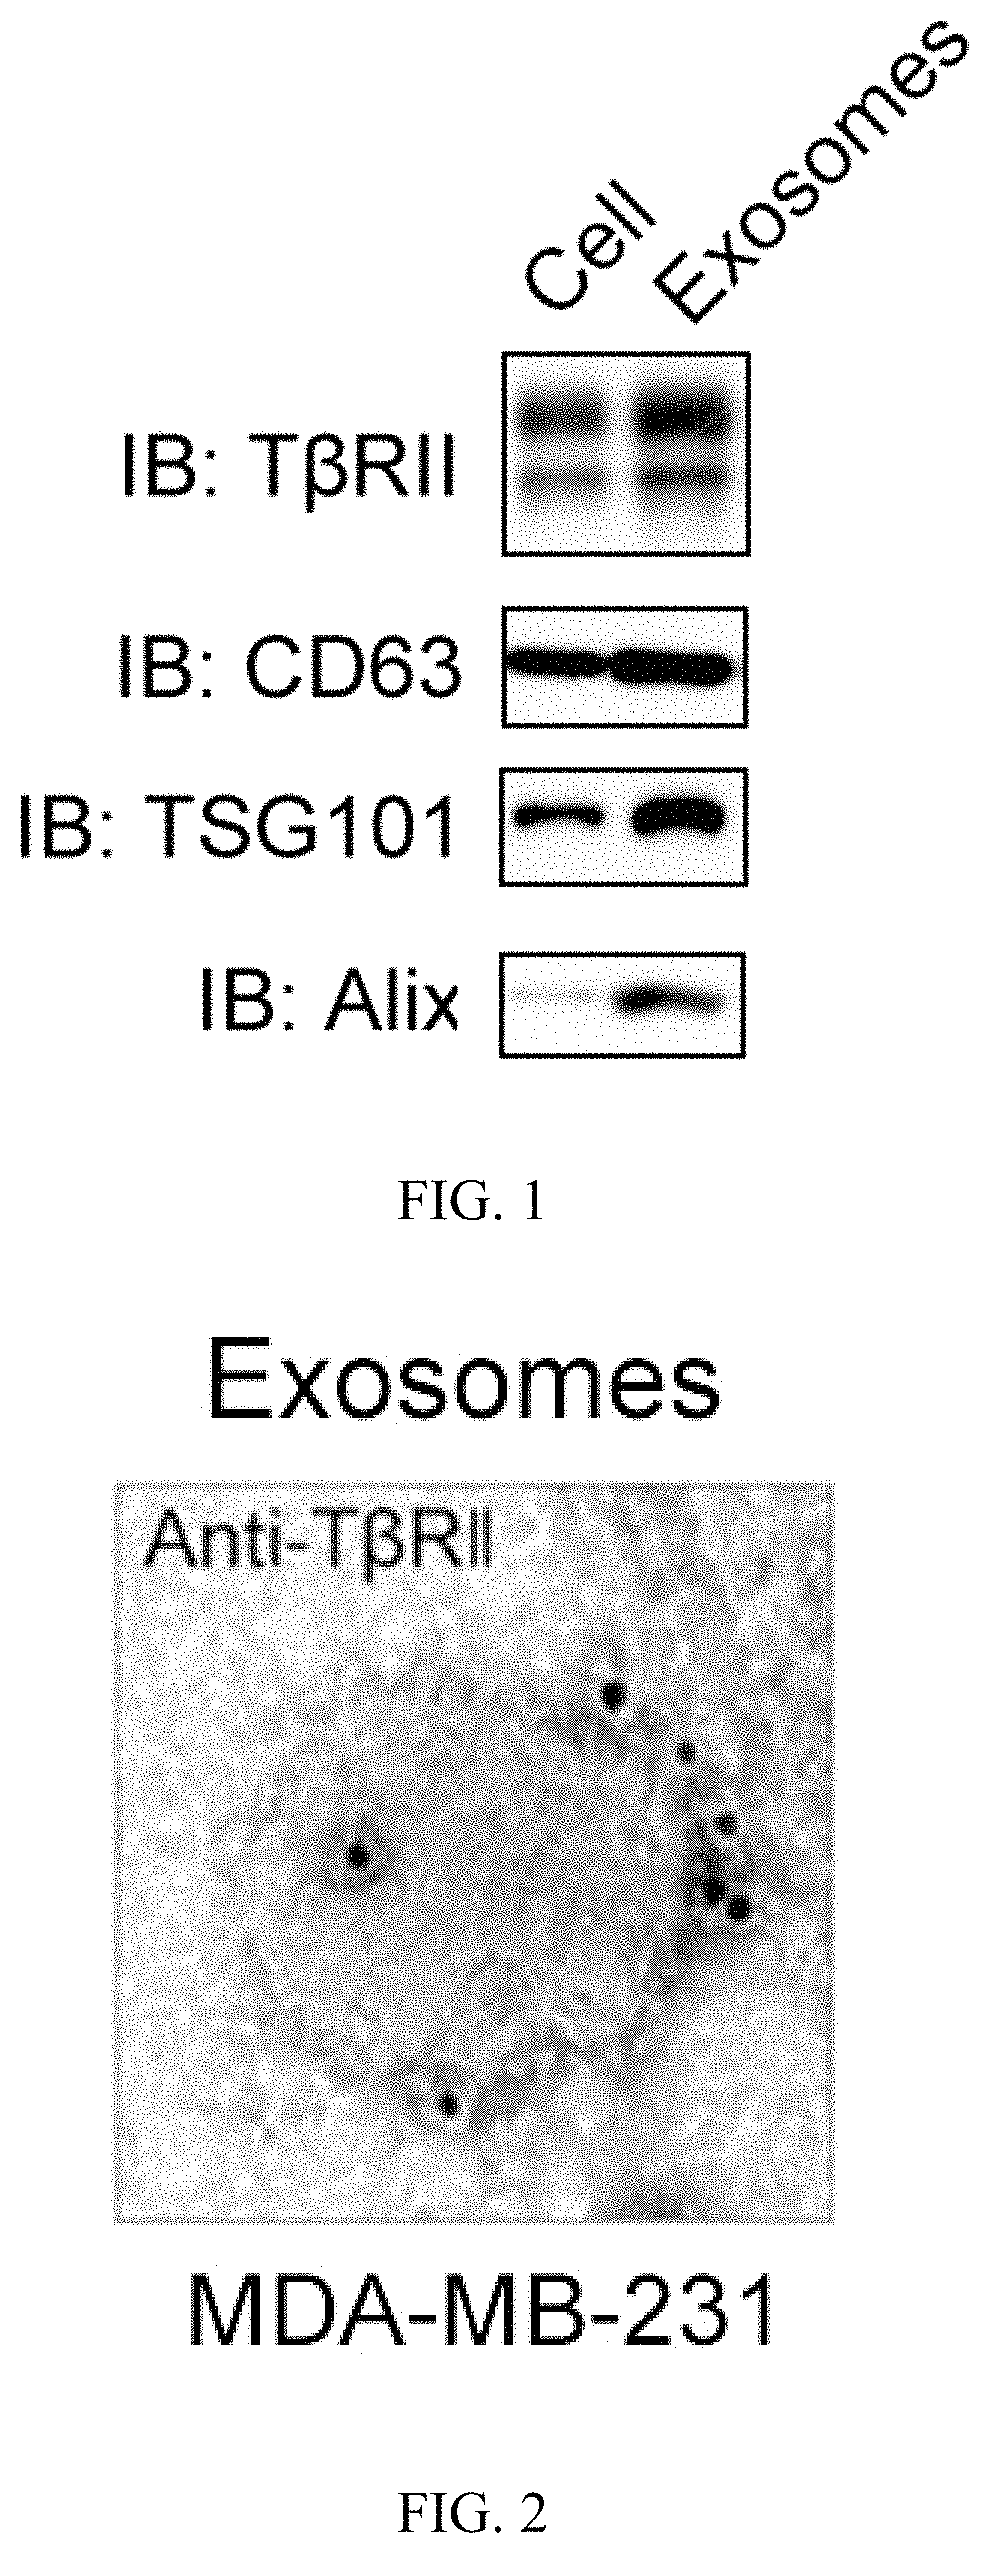 Application of exosome TβRII protein as a marker in the preparation of breast cancer detection kit